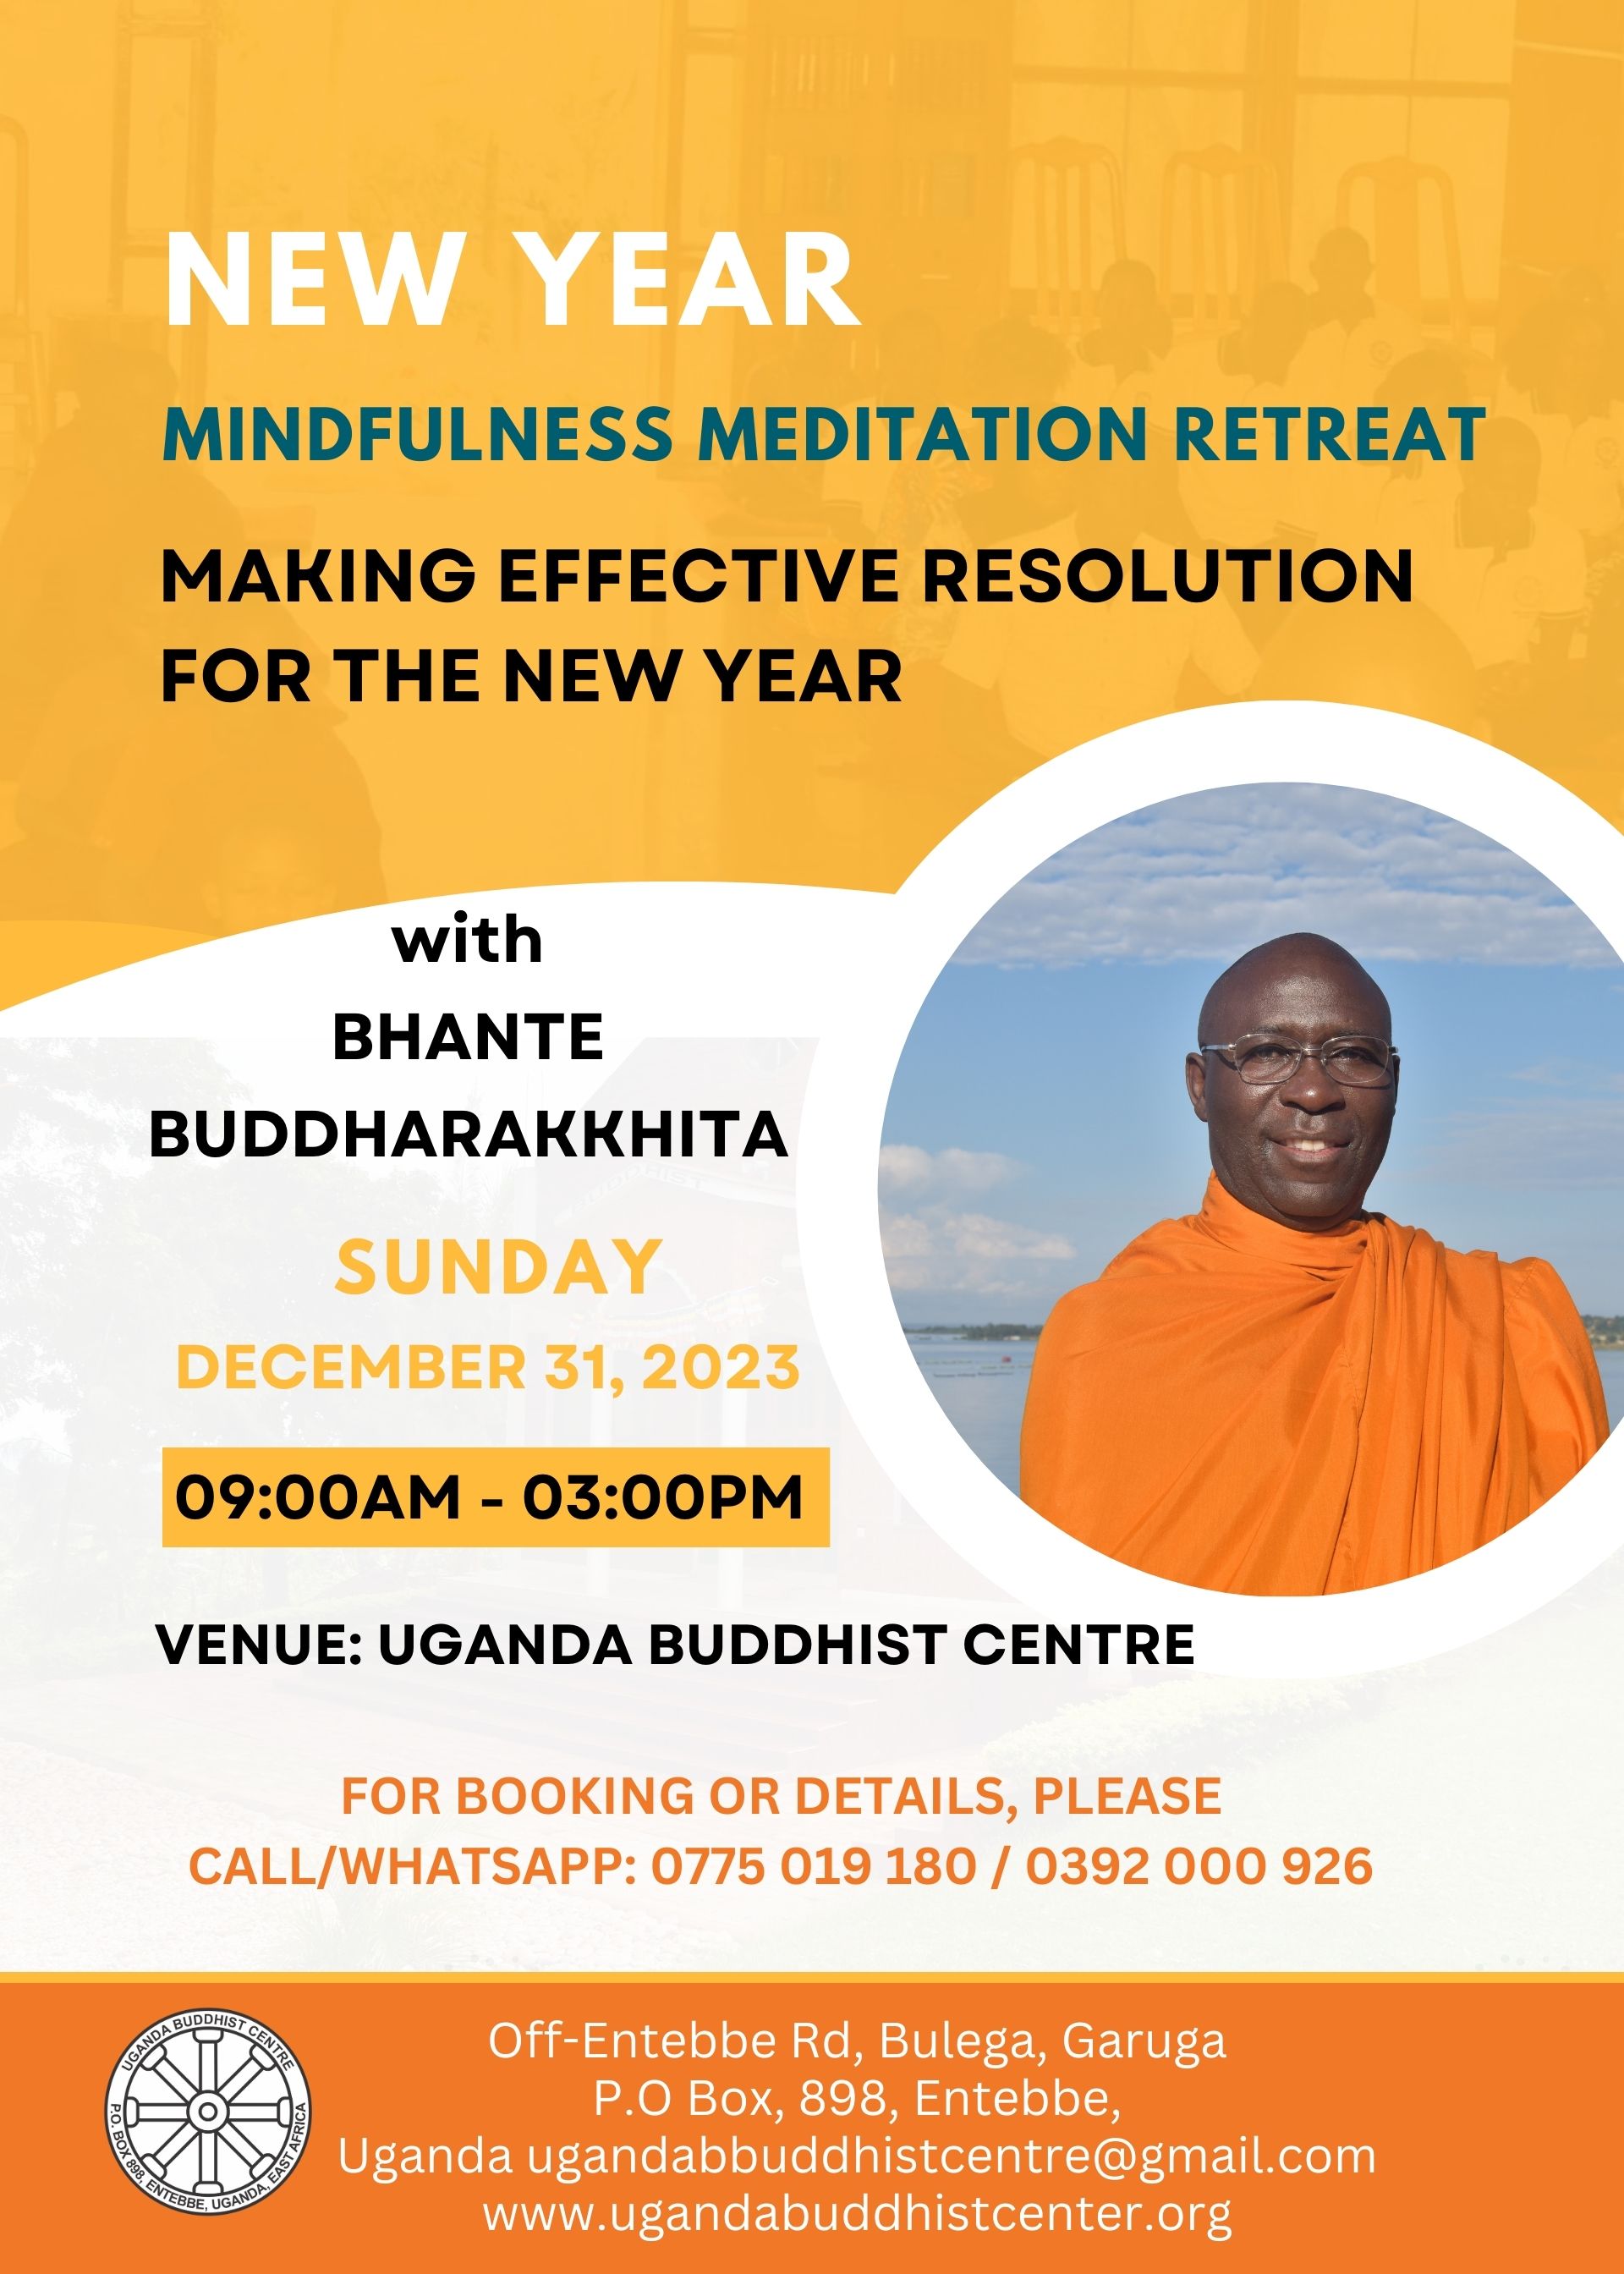 Ring in the New Year with Mindfulness: Retreat at Uganda Buddhist Centre